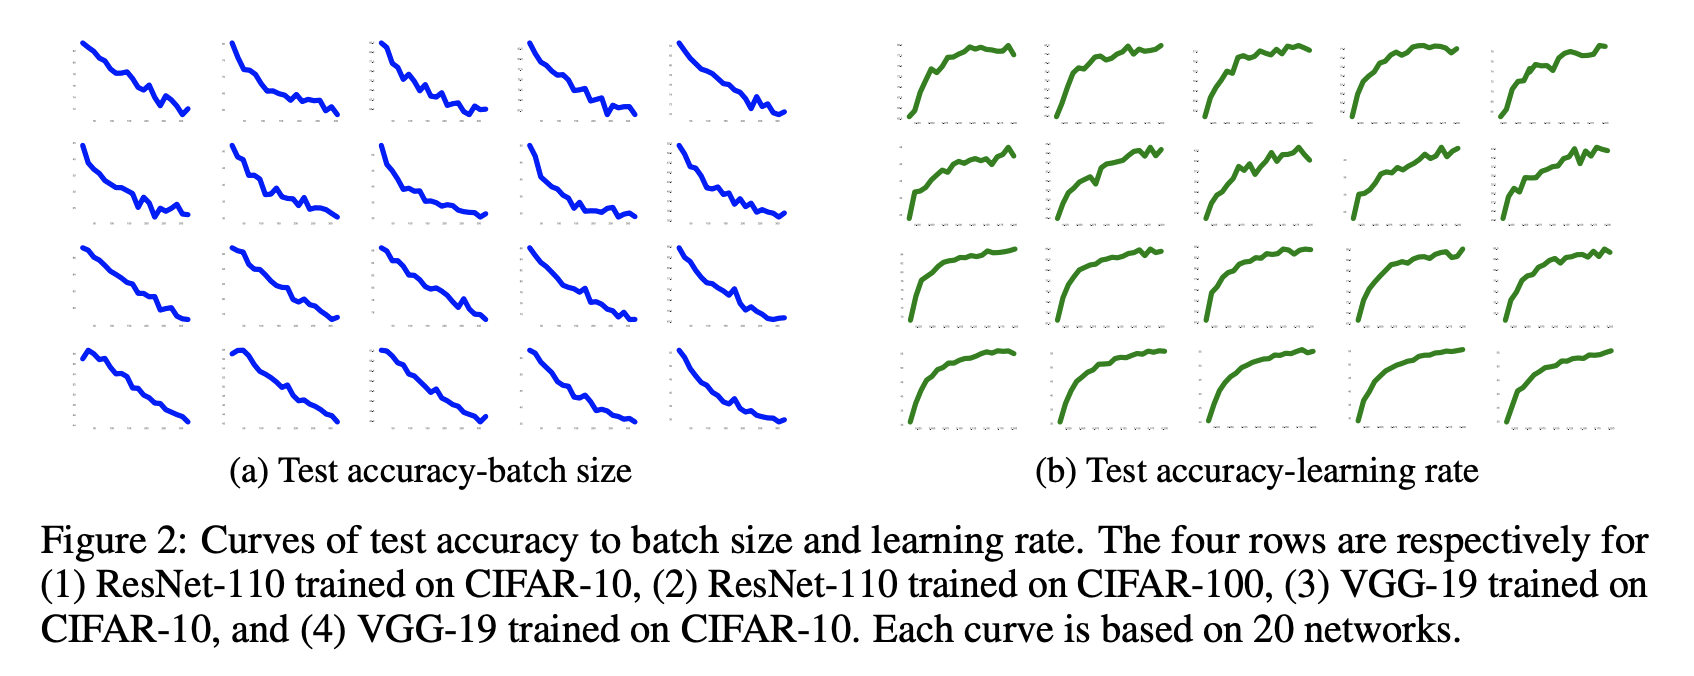 Generalization with respect to learning rate and batch size